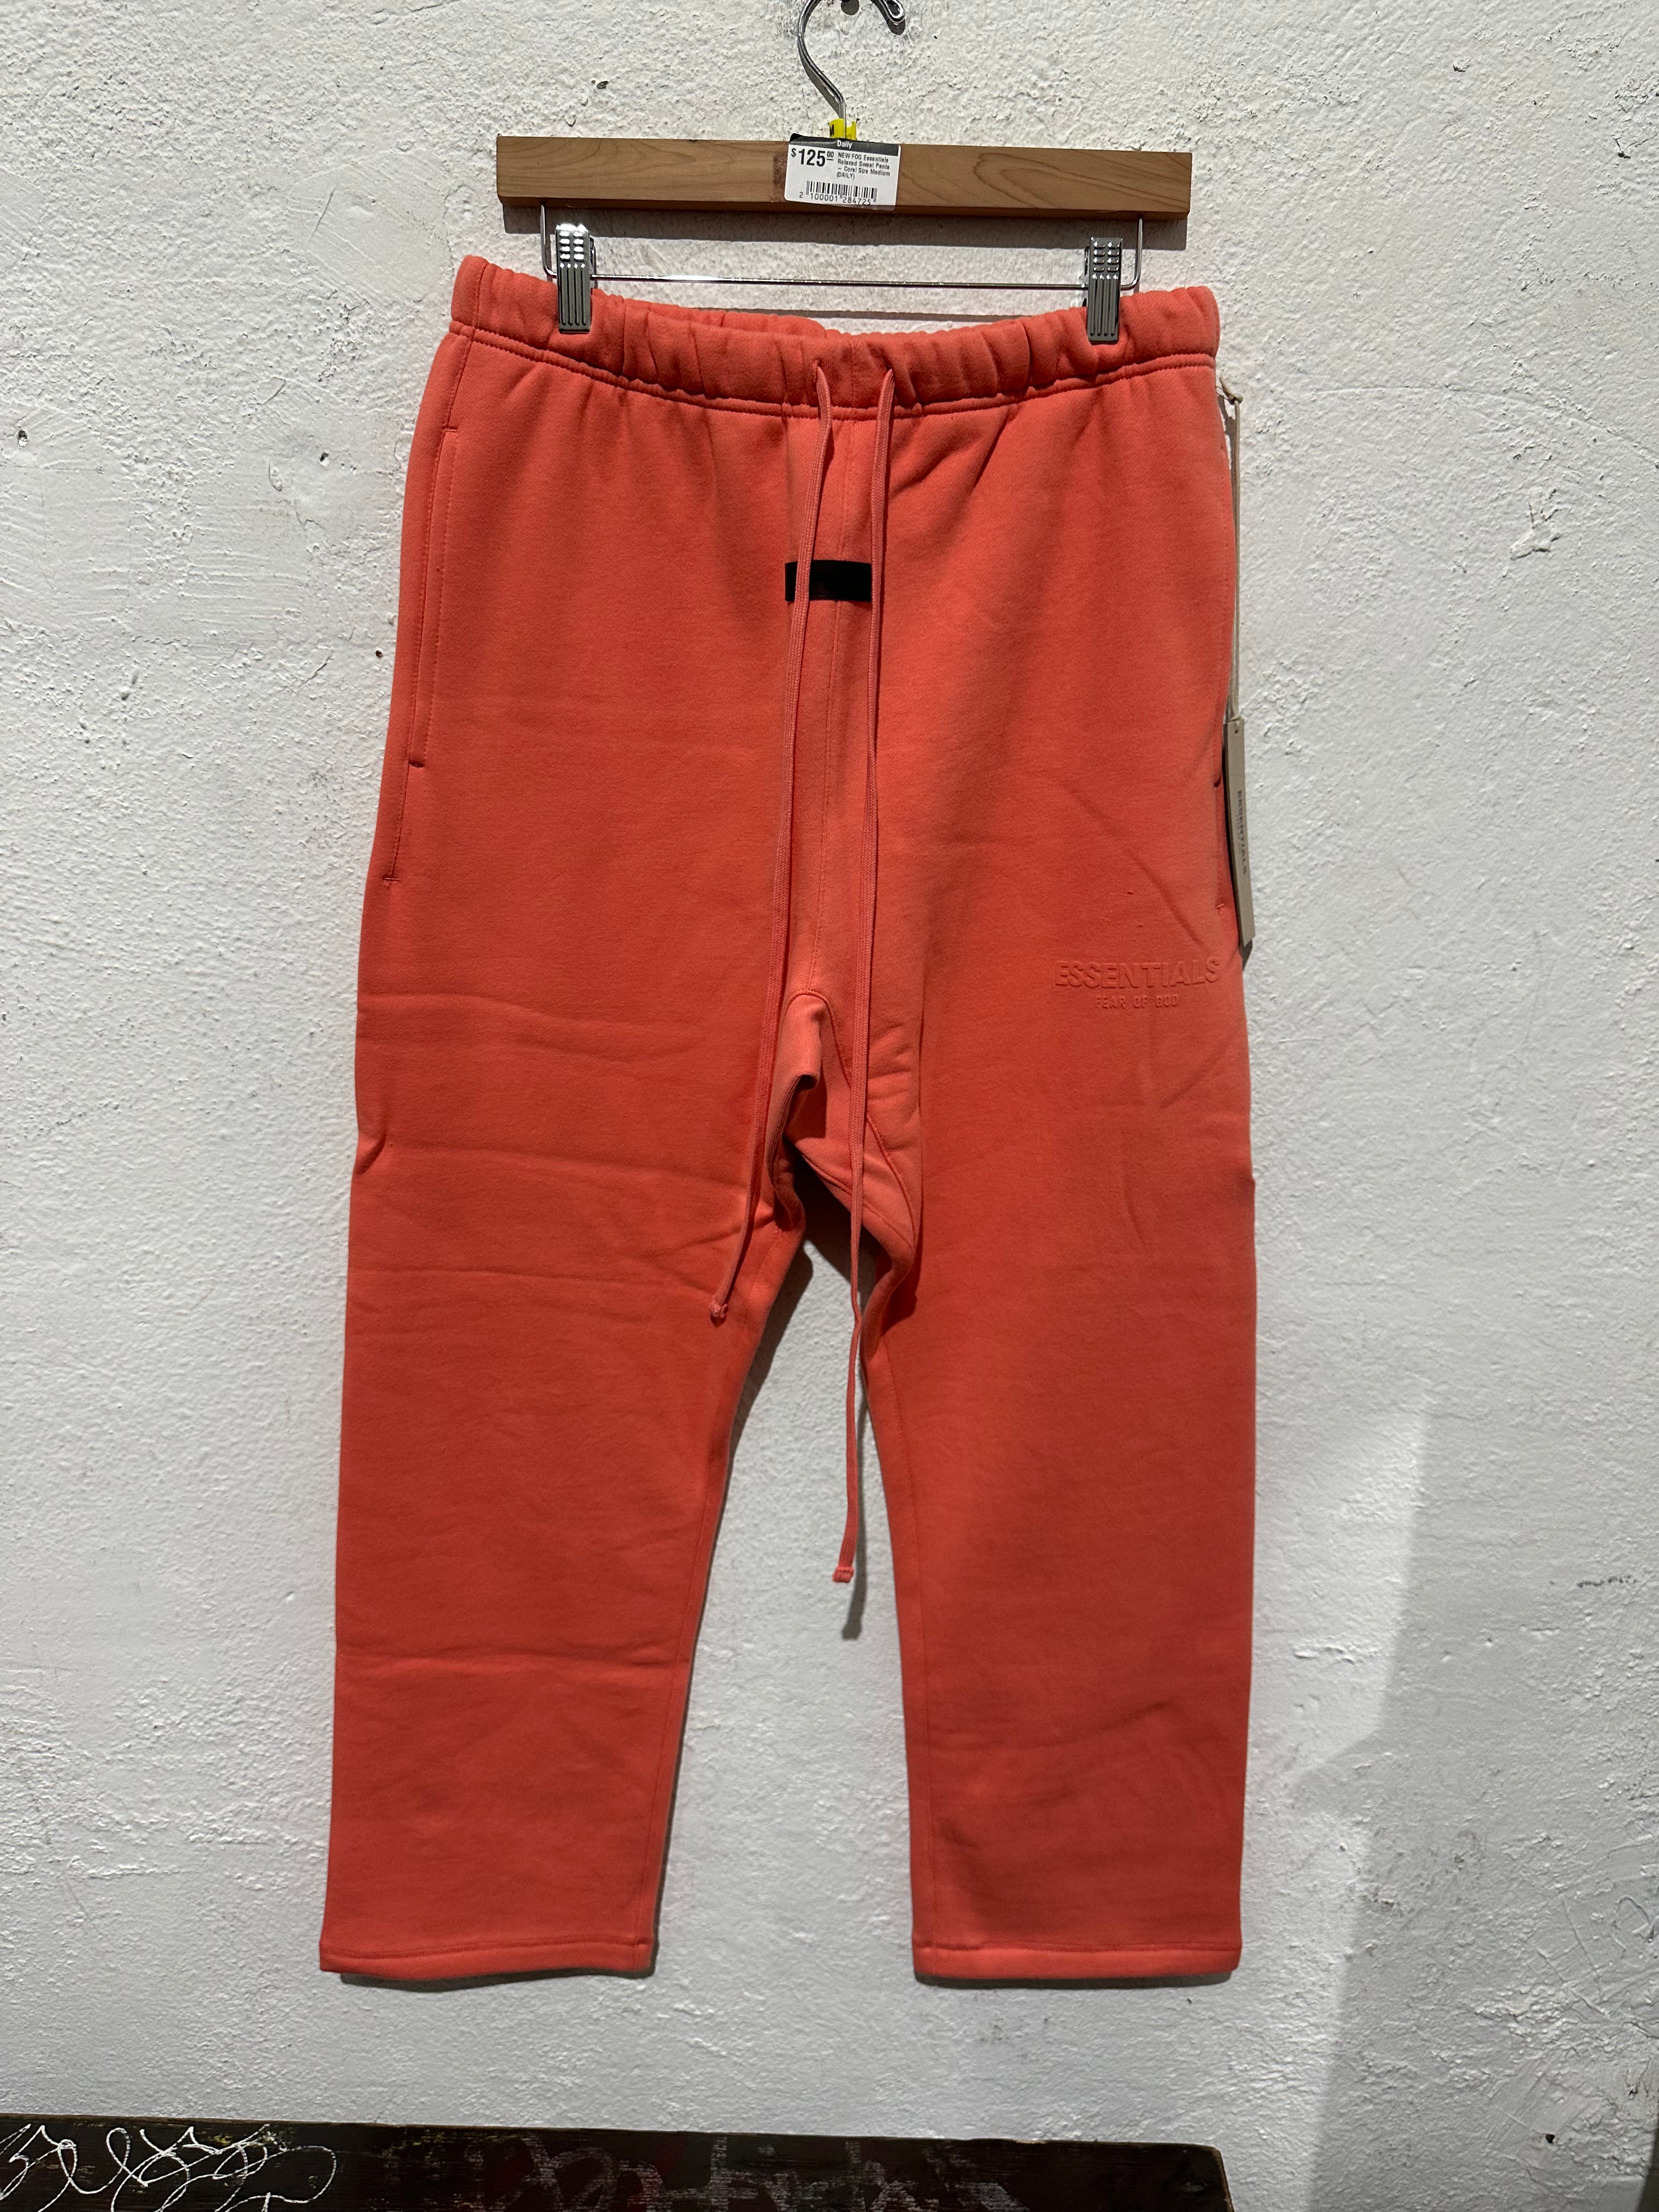 NEW FOG Essentials Relaxed Sweat Pants - Coral Size Medium